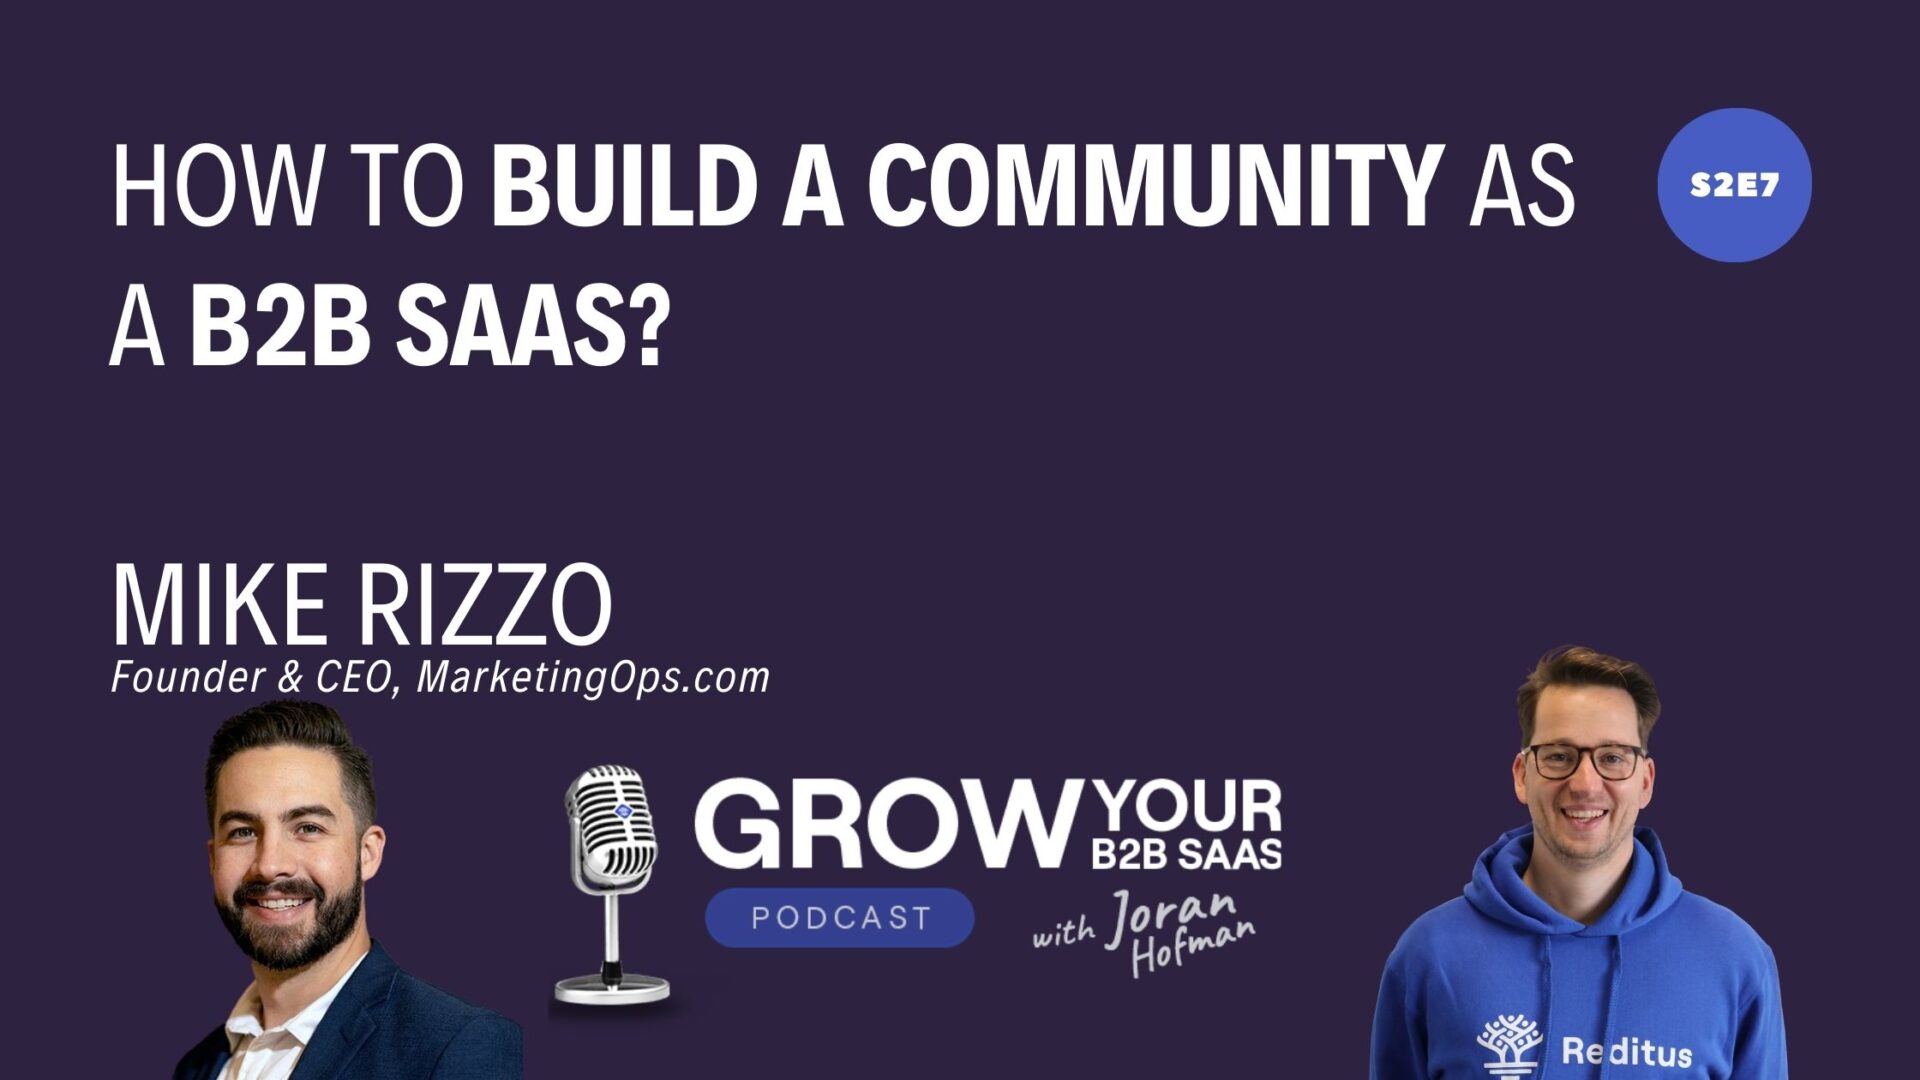 https://www.getreditus.com/podcast/s2e7-how-to-build-a-community-as-a-b2b-saas-with-mike-rizzo/